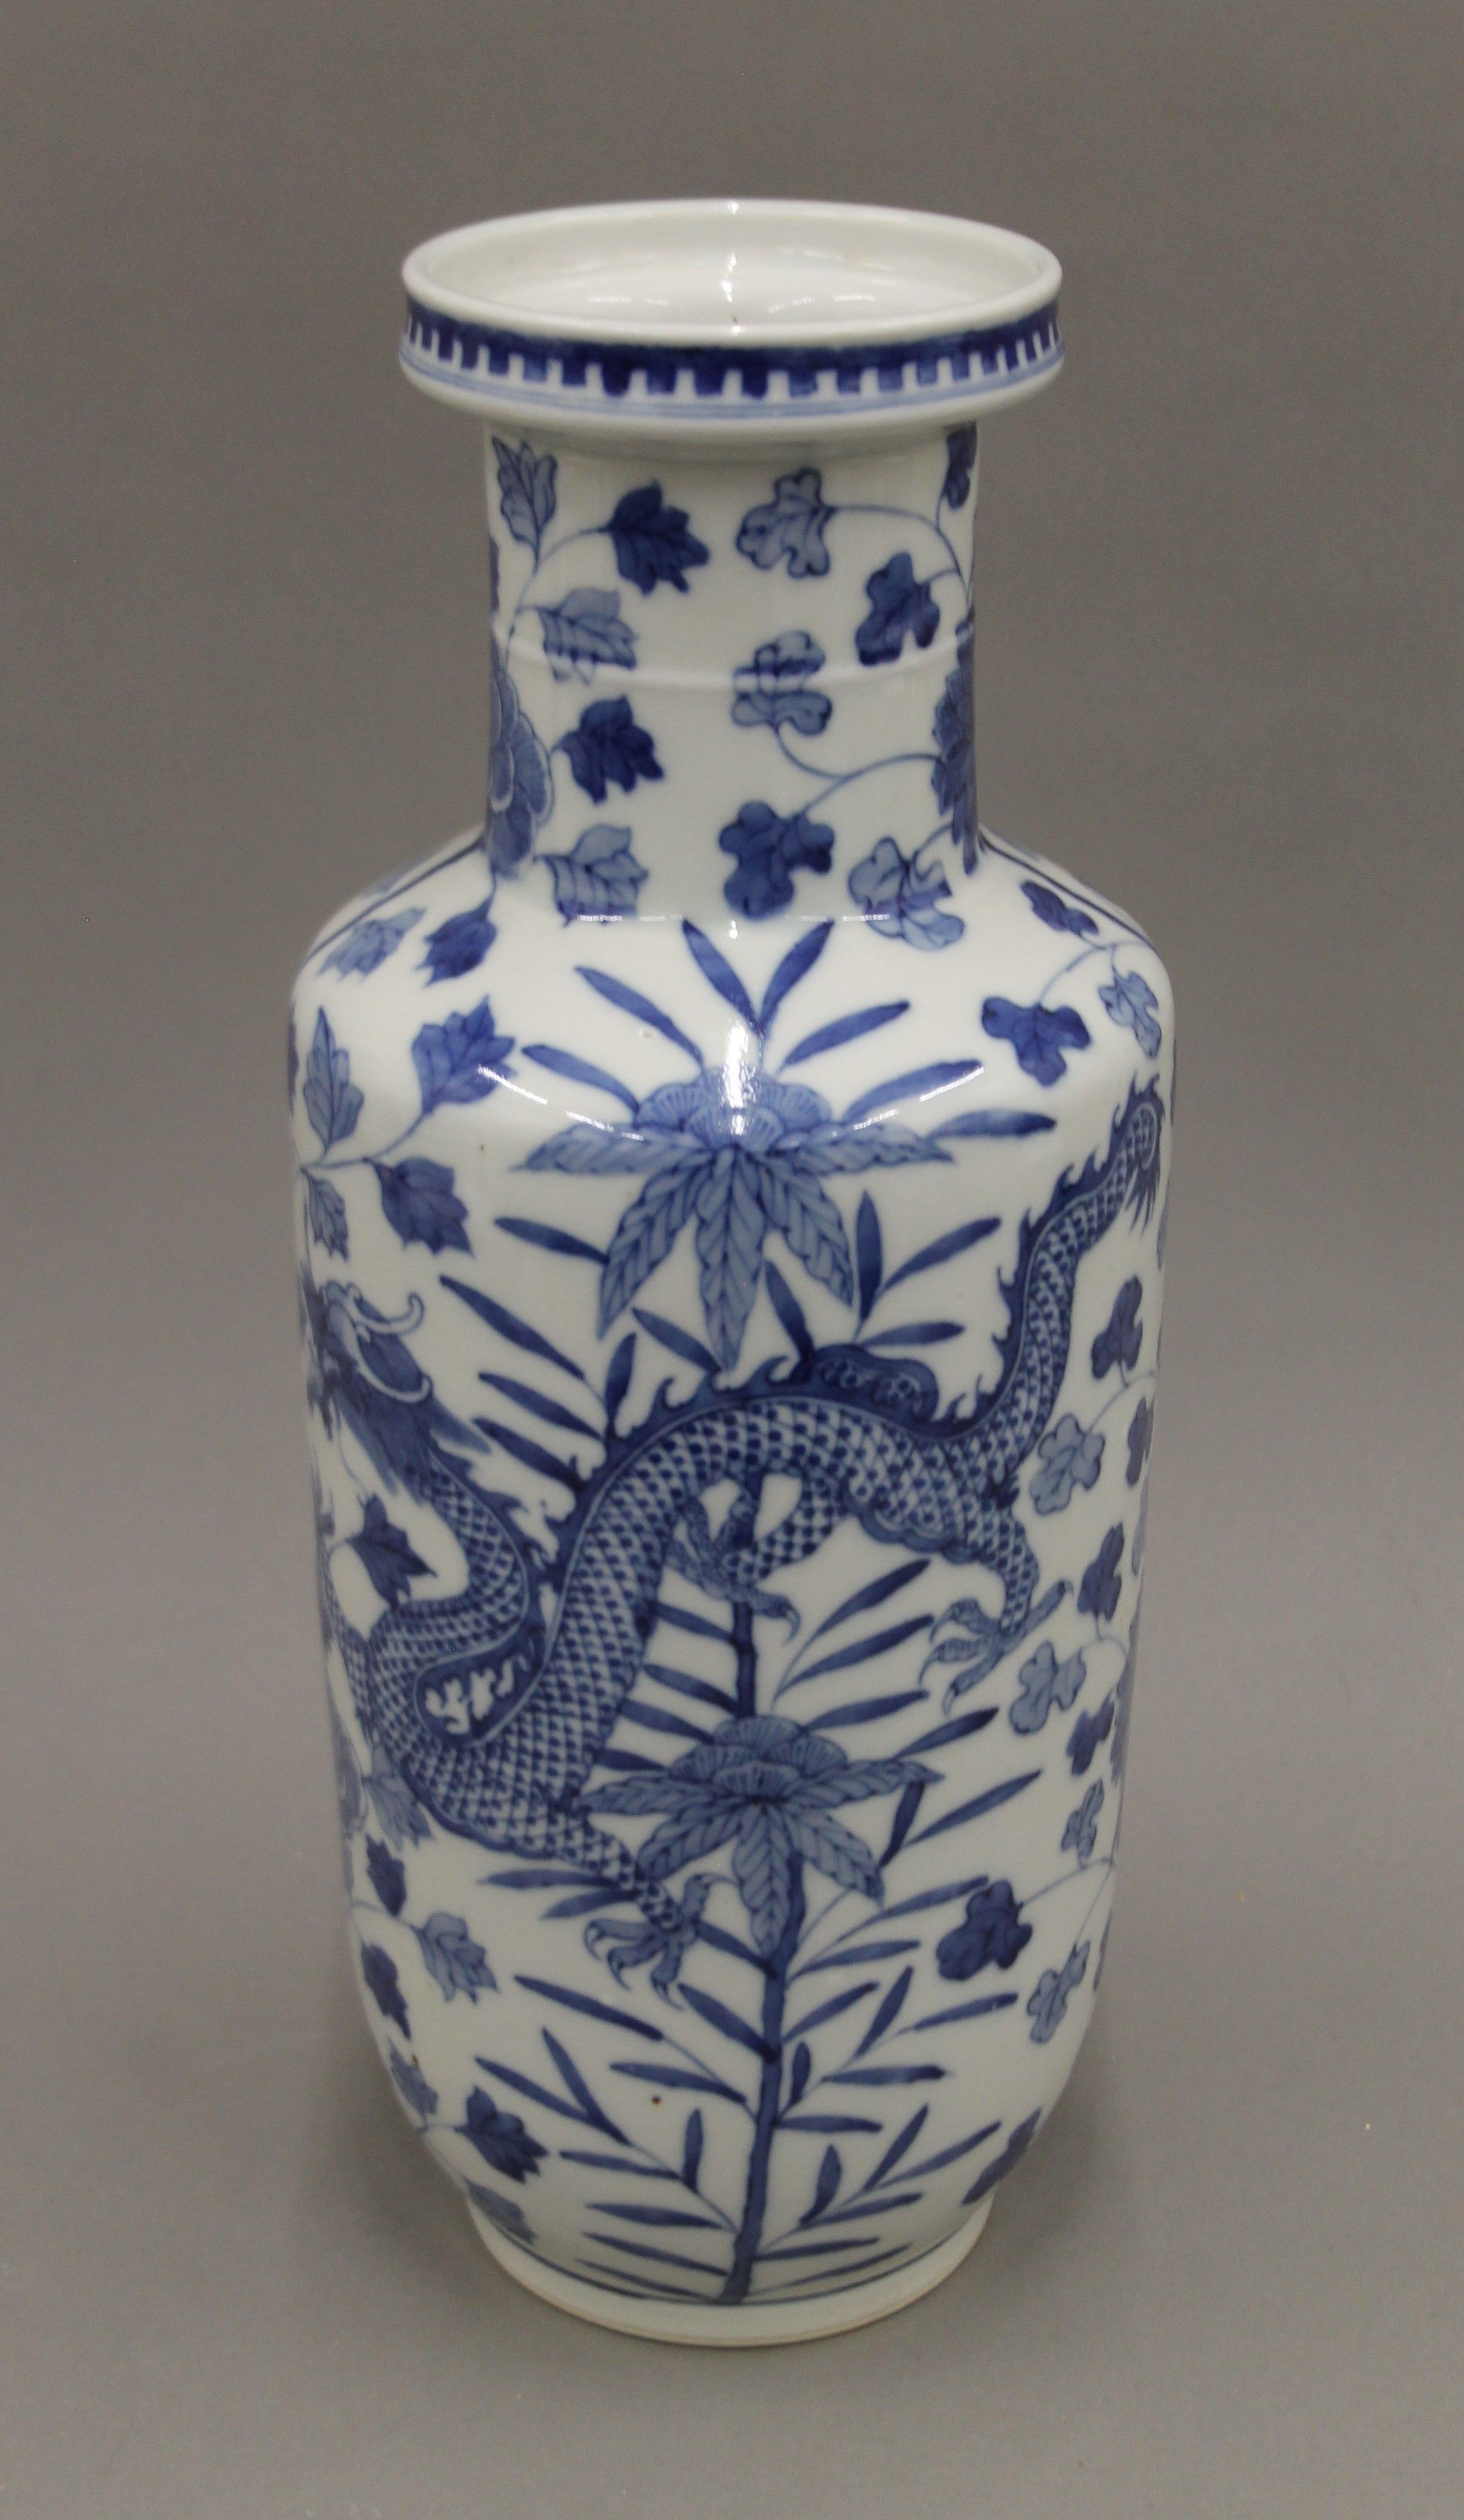 A Chinese blue and white porcelain Rouleau vase. 37 cm high.